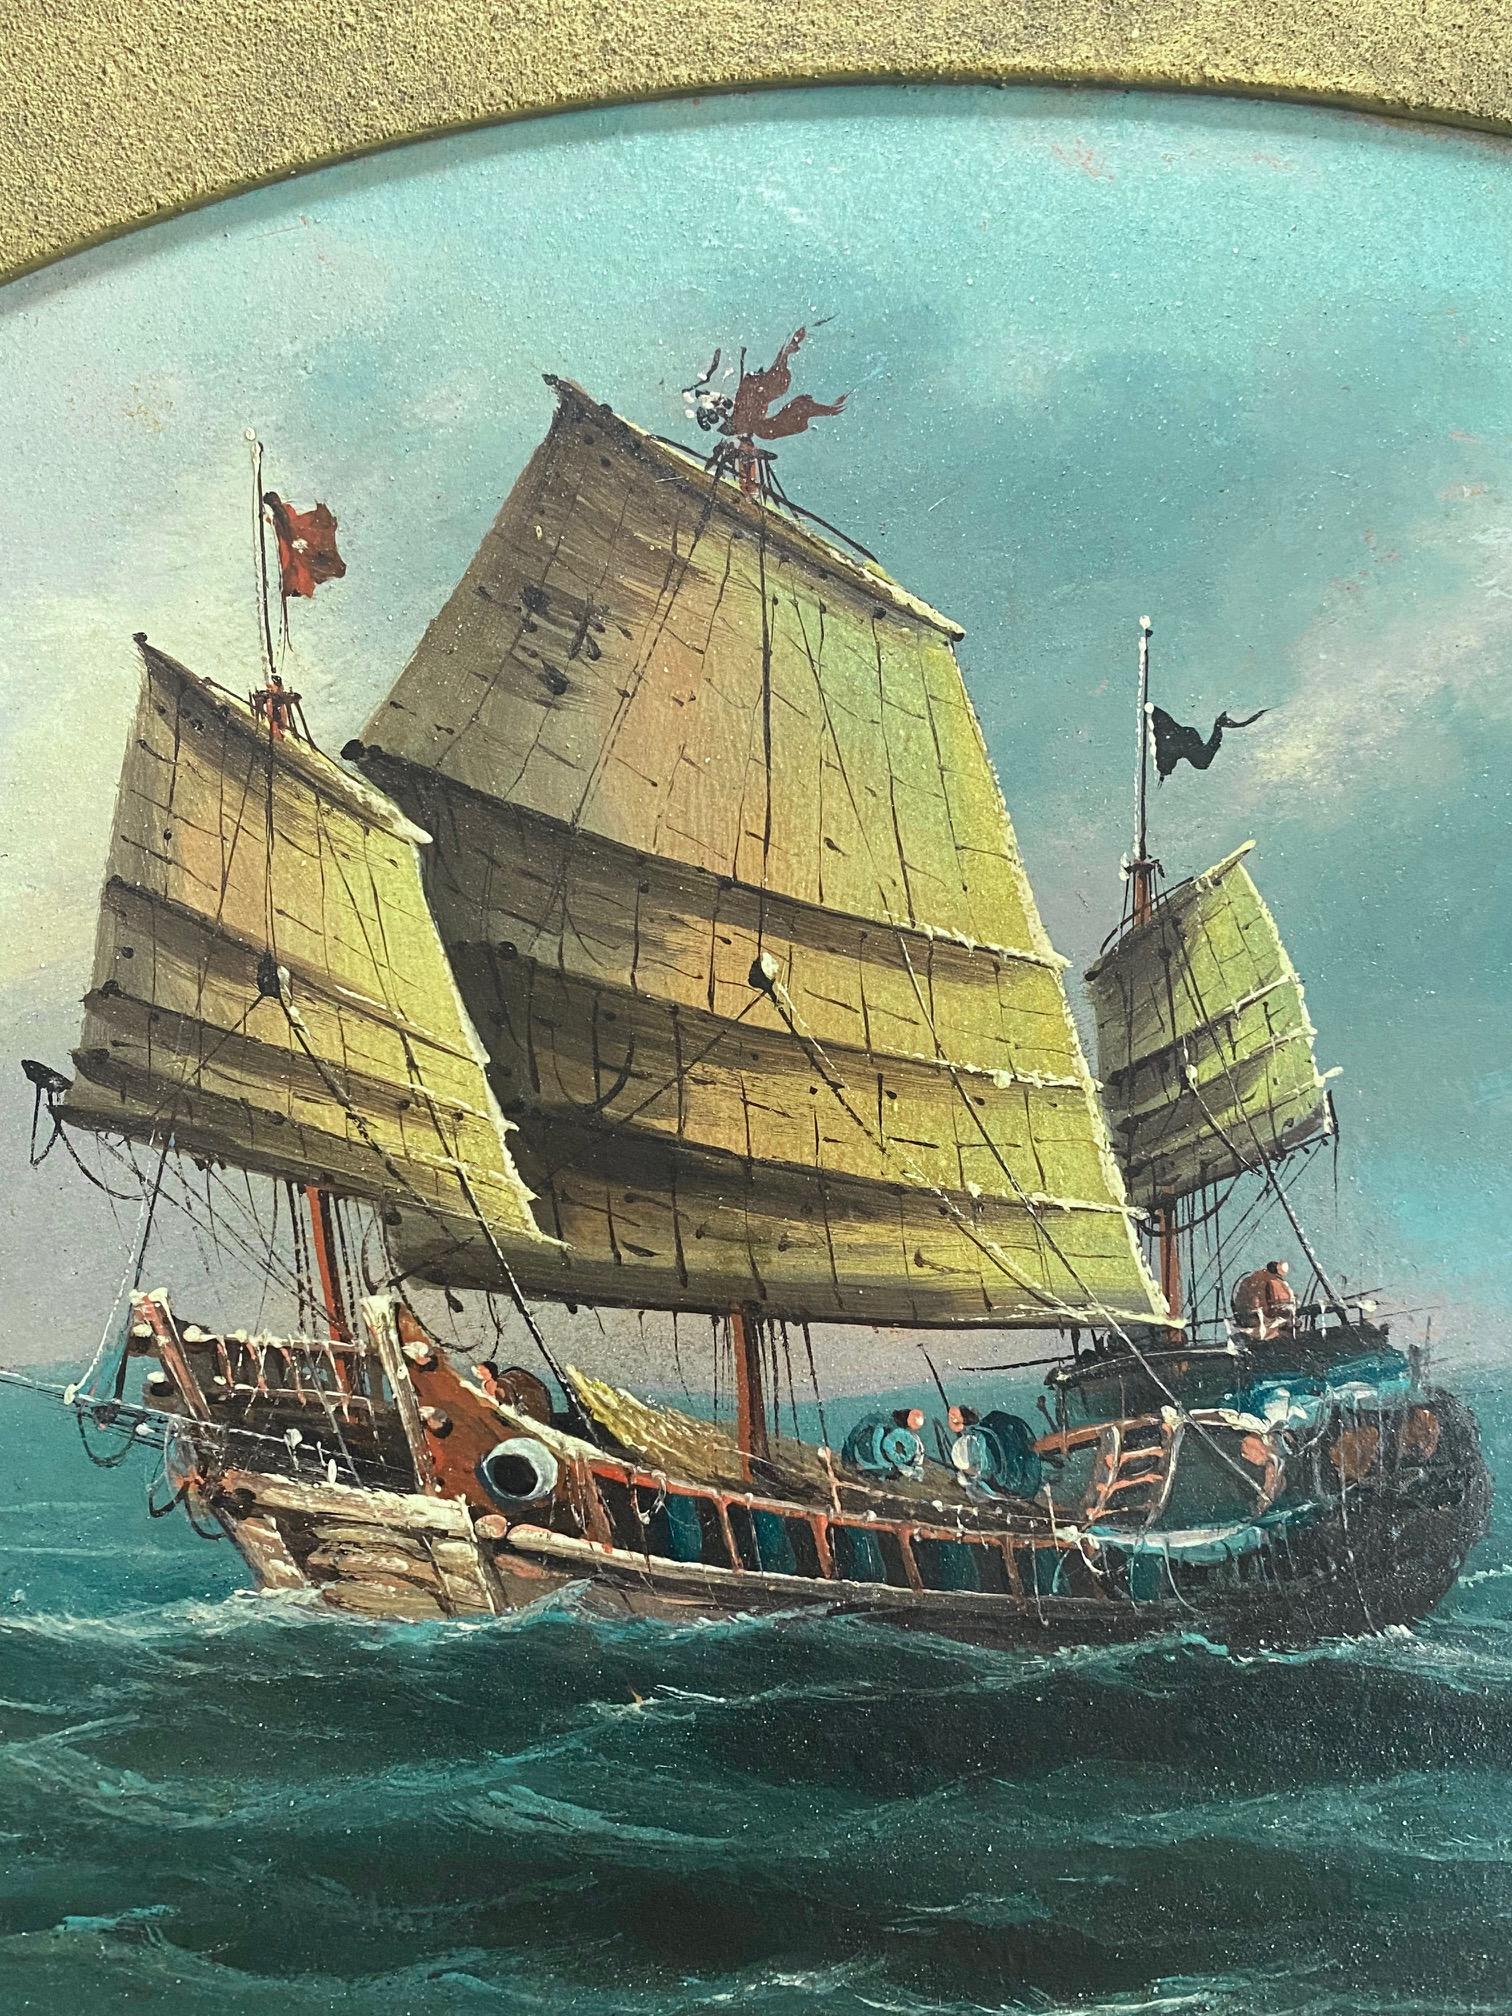 19th Century China Trade Seascape with a Junk, by Lee Heng, circa 1870, an oil on board seascape with large Chinese Junk under full sail in the foreground, four other craft in the background (two of which may be western ships), signed in Chinese